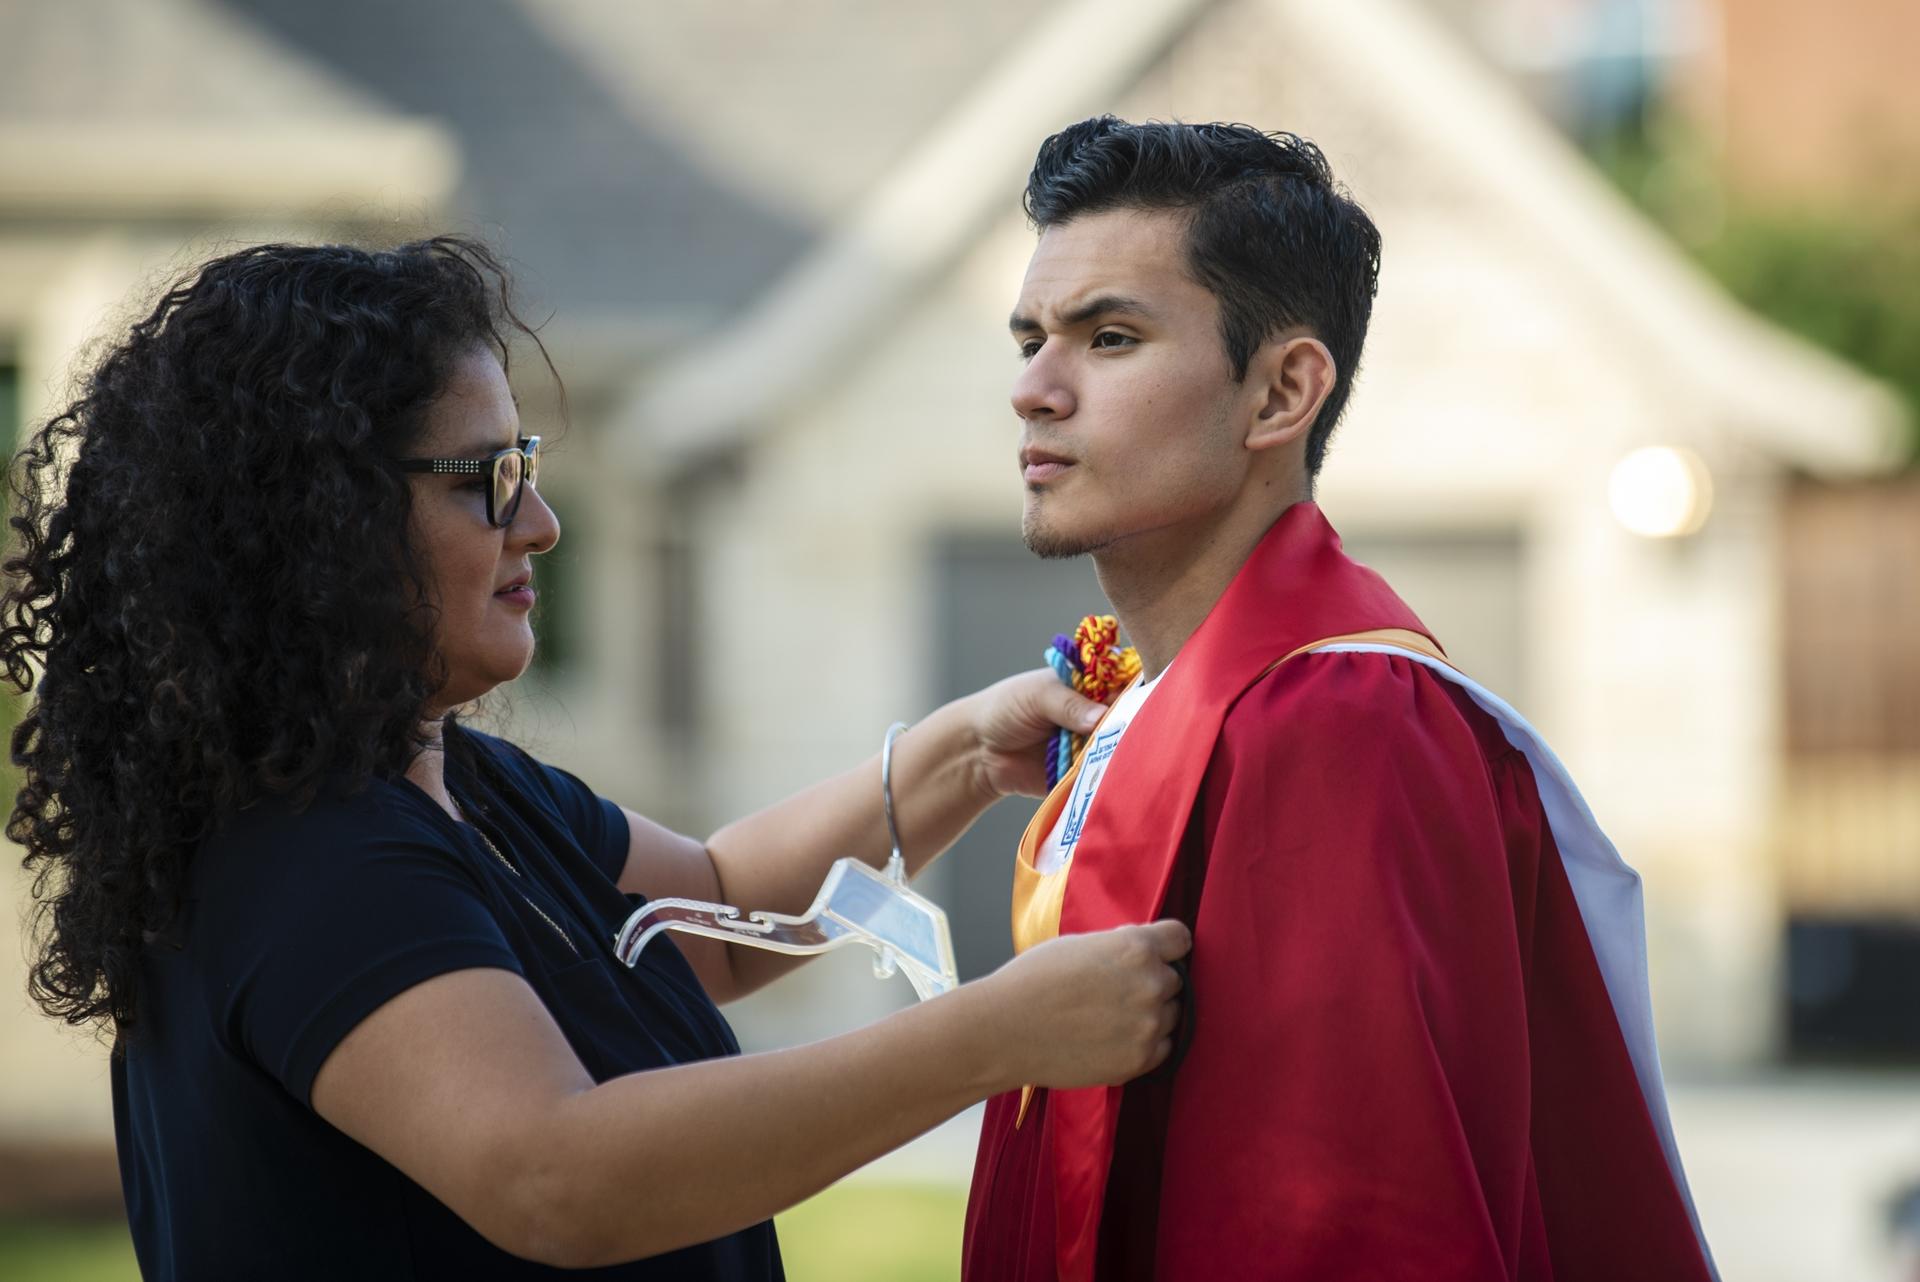 Xochitl Ortiz, left, helps her son Izcan Ordaz to try on his graduation gown outside their home in Keller, Texas, May 28, 2020.